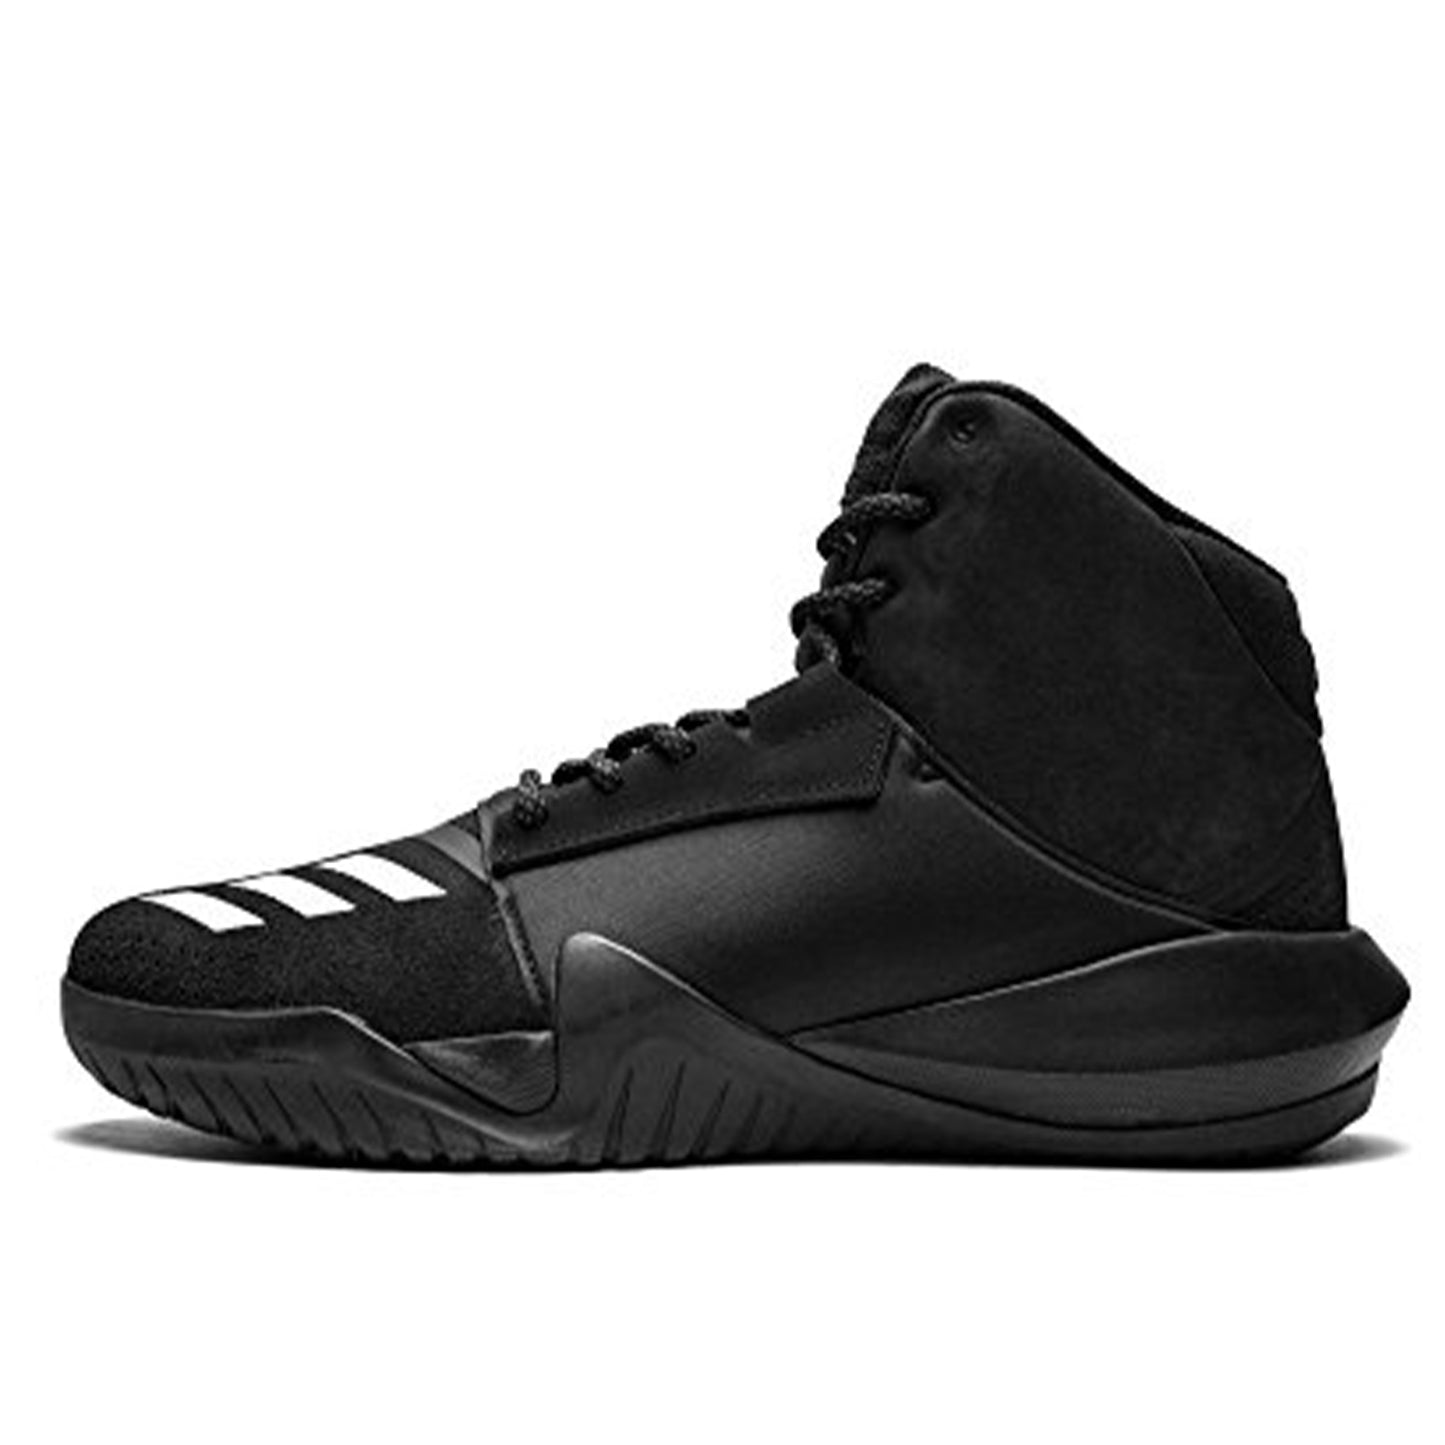 adidas Basketball ADO Crazy Team Taille 9.5 - Homme BY2870 Noir/Blanc